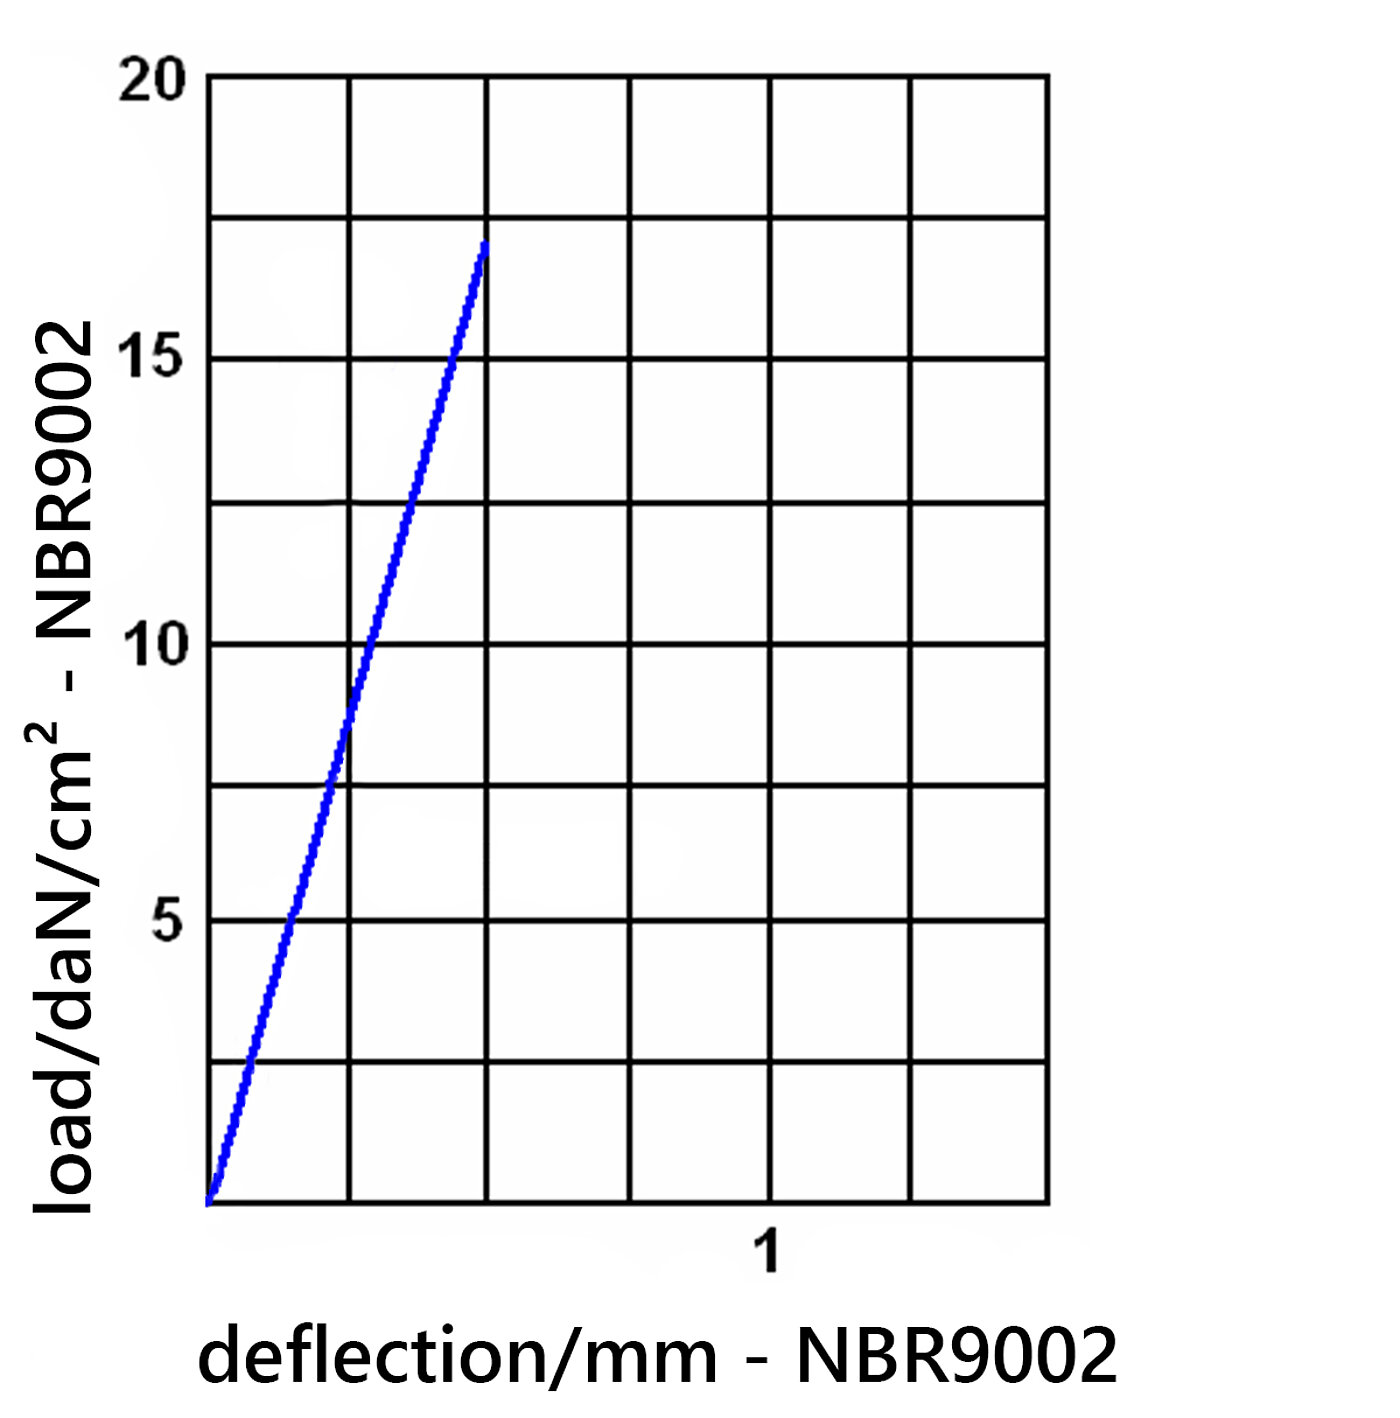 diagramme of the deflection of the elastomer board NBR9002 under load 